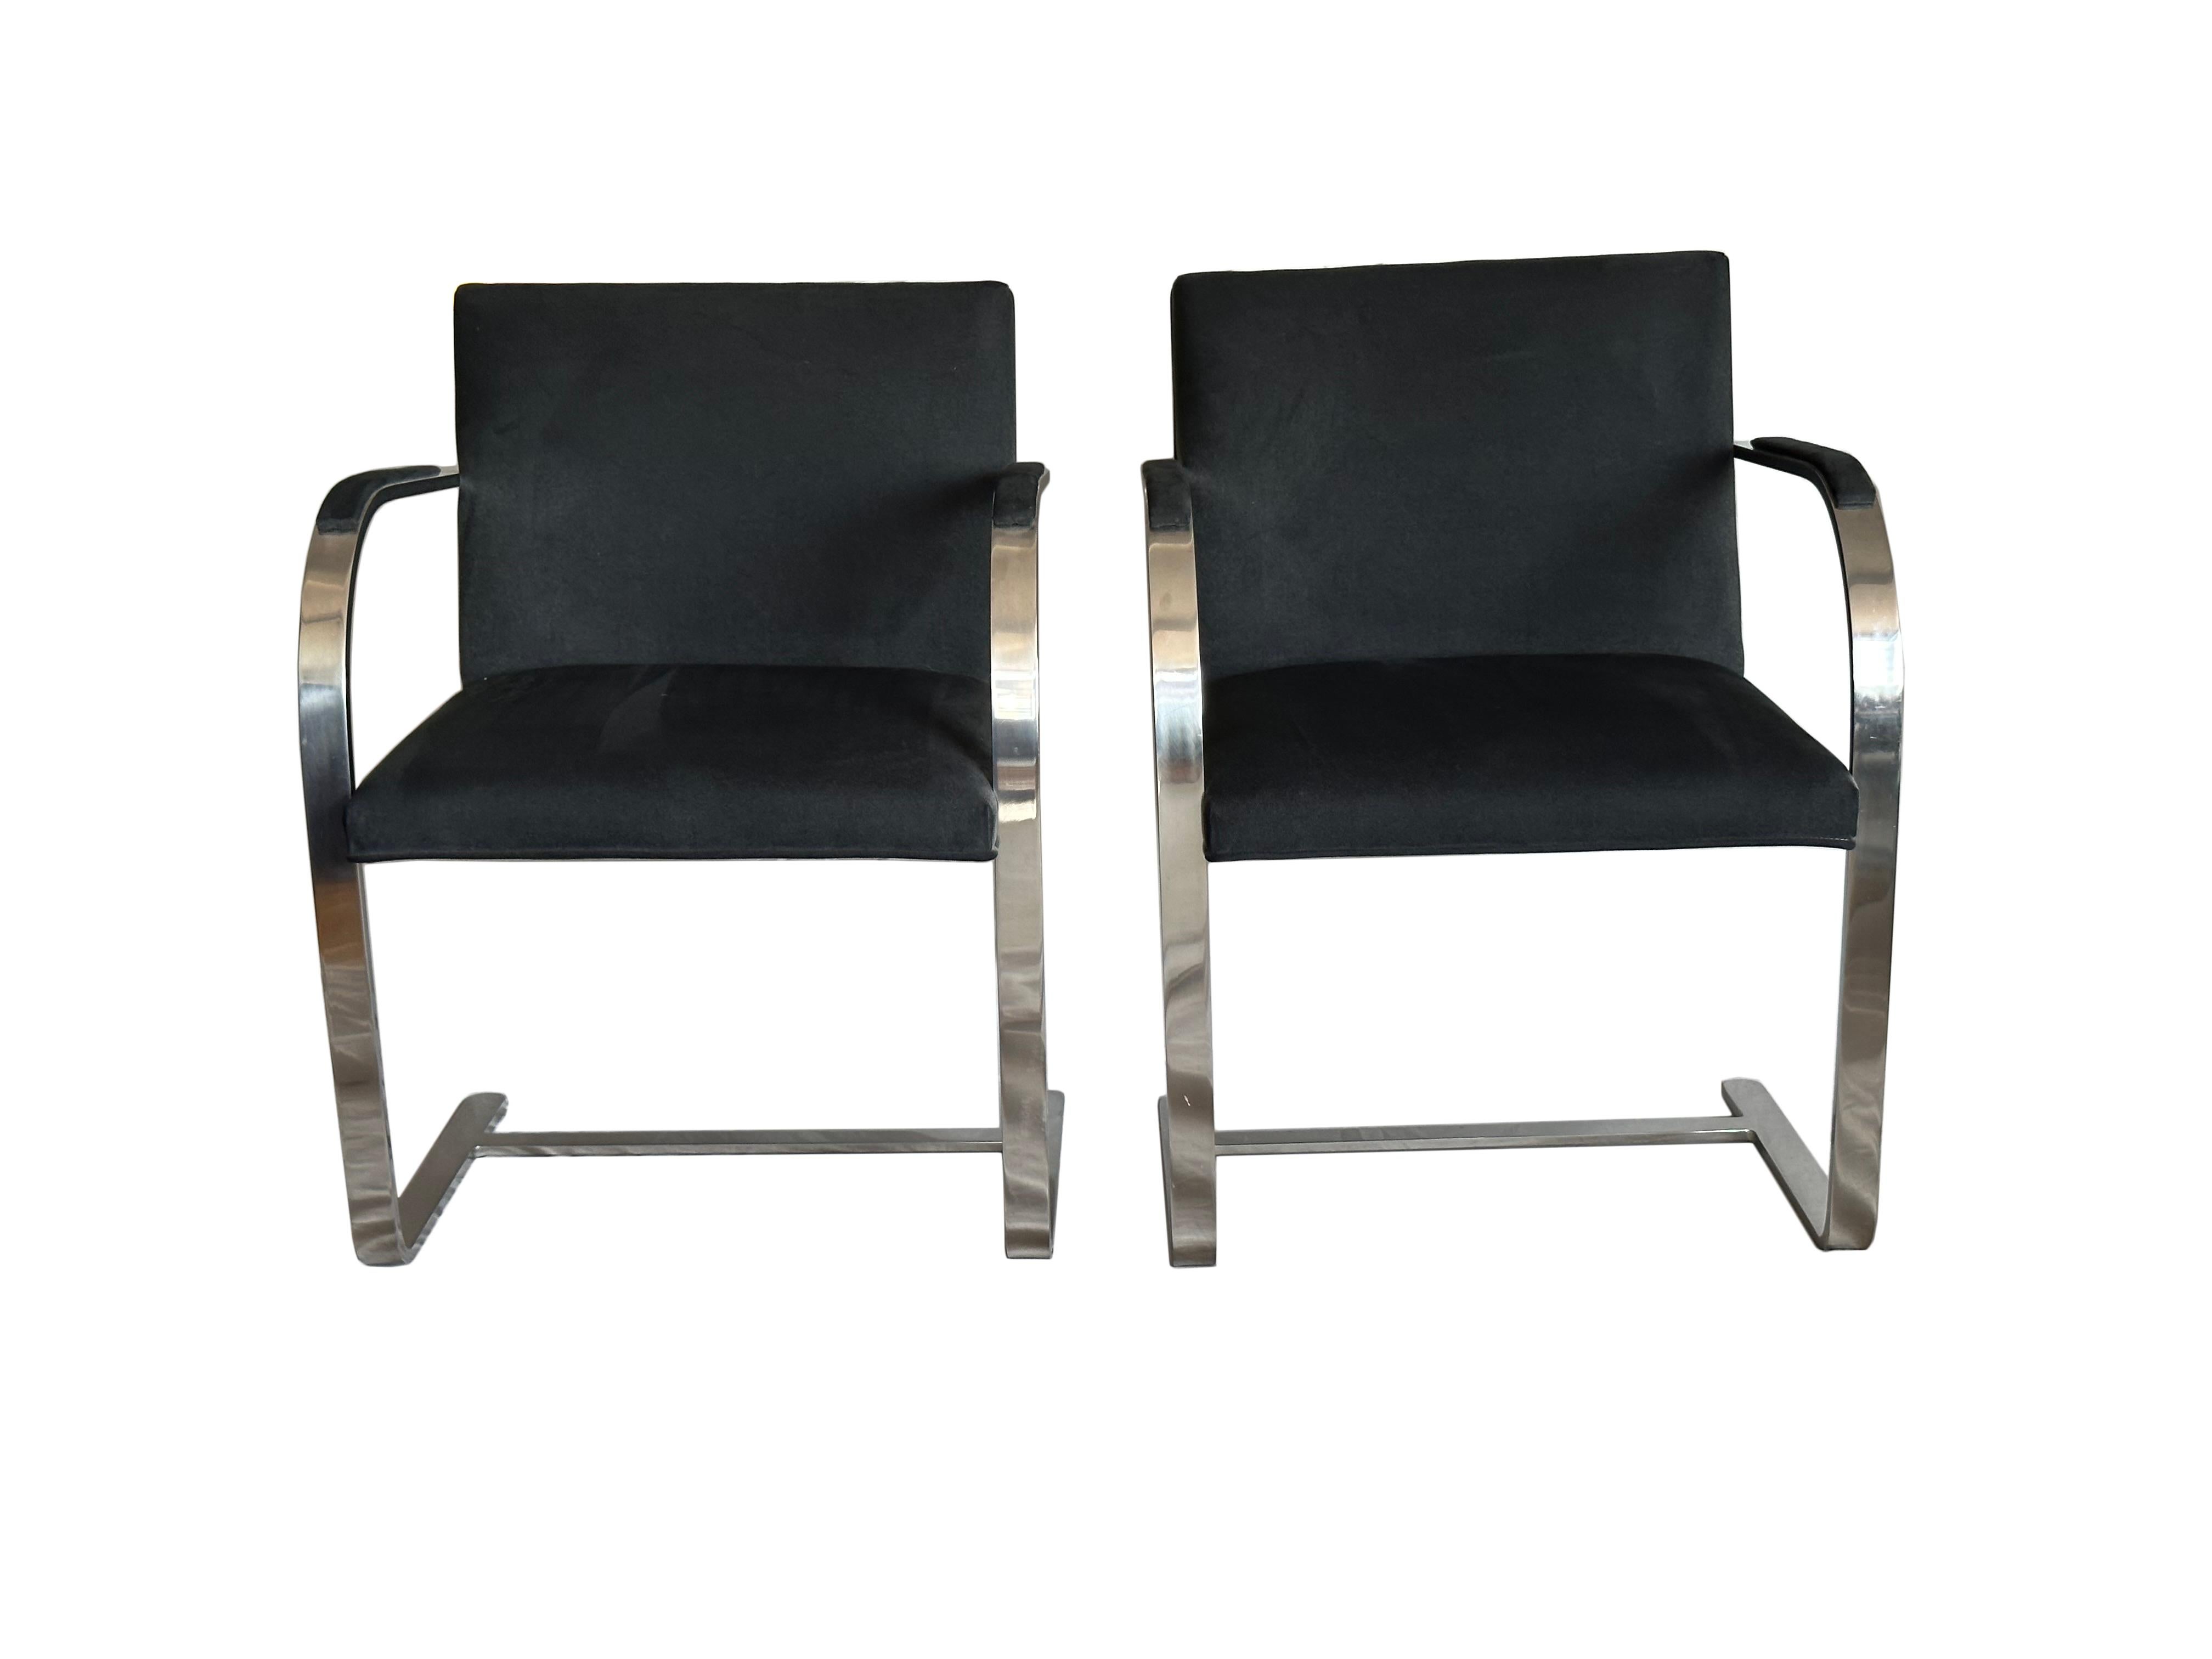 Polished Pair of Iconic Mies Van Der Rohe Brno Flat Bar Chair in Black Suede For Sale